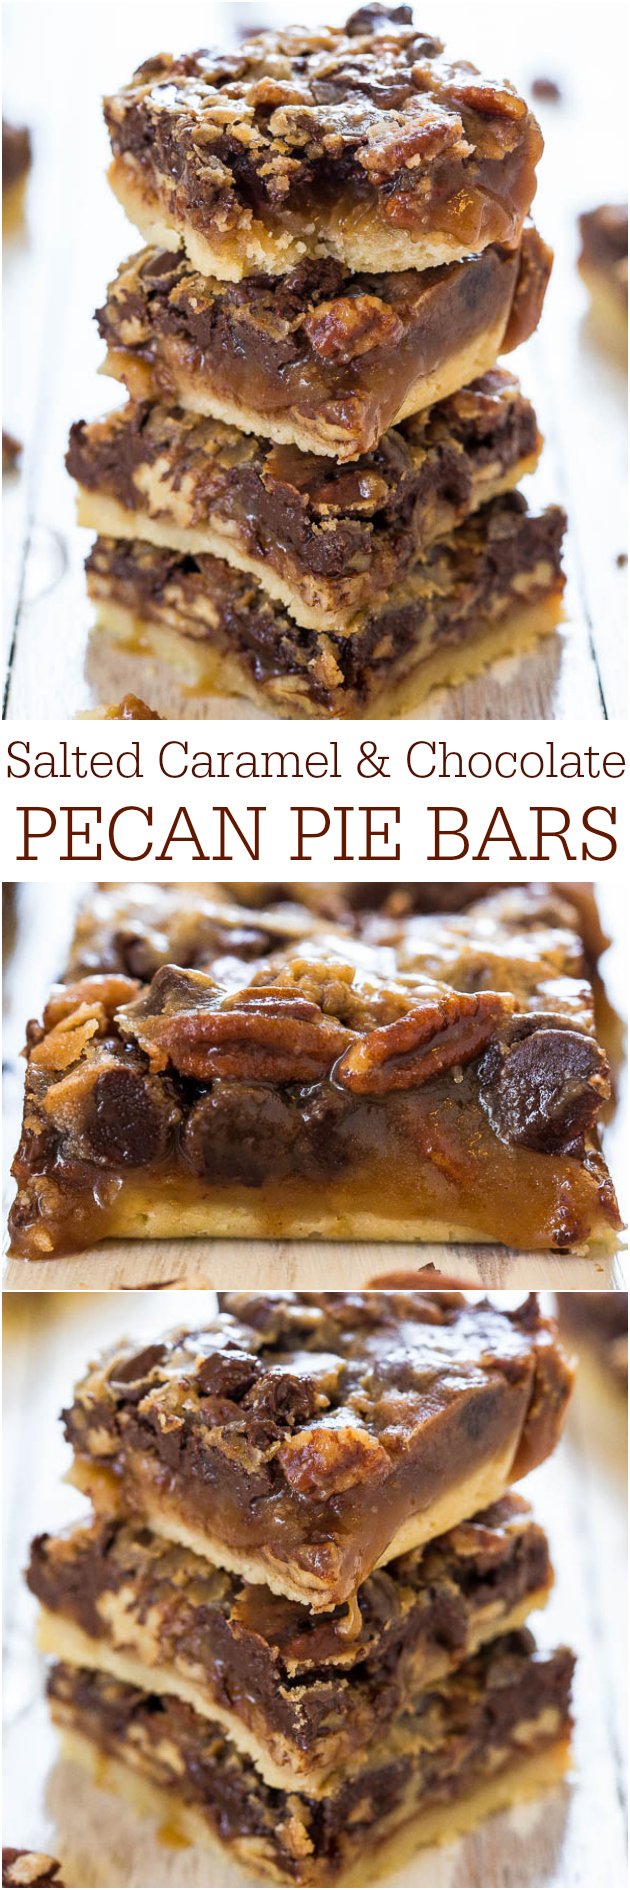  Salted Caramel and Chocolate Pecan Pie Bars - You'll never want plain pecan pie again! Caramel and chocolate makes the bars taste amazing!